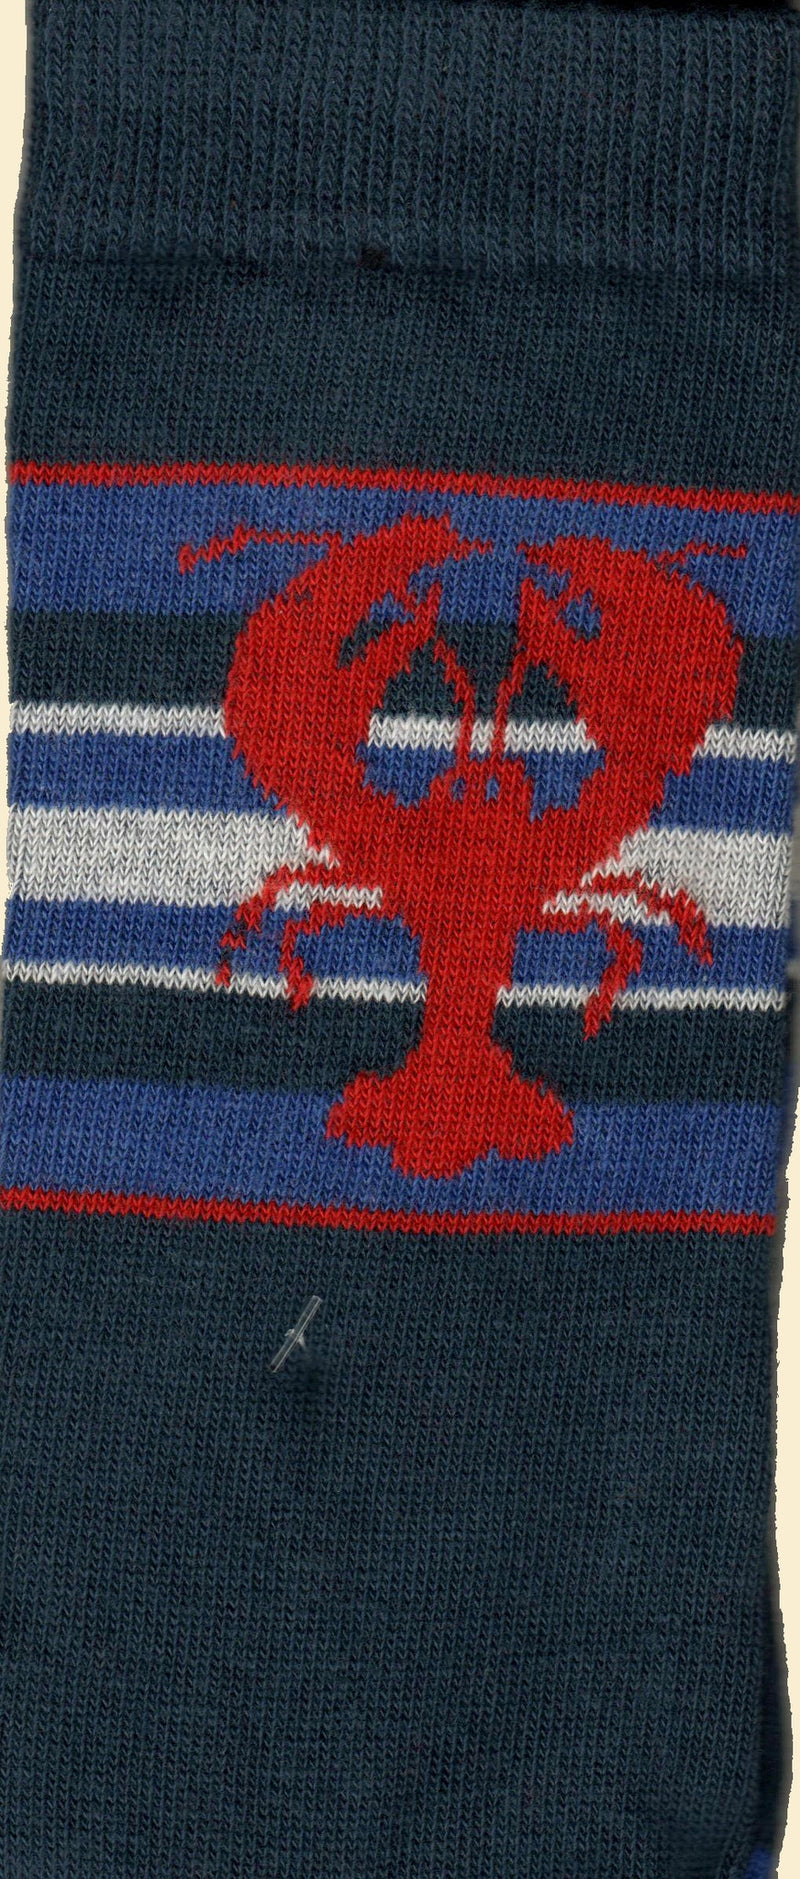 This is a Scan of the Lobster Sock showing the real white, blues and red